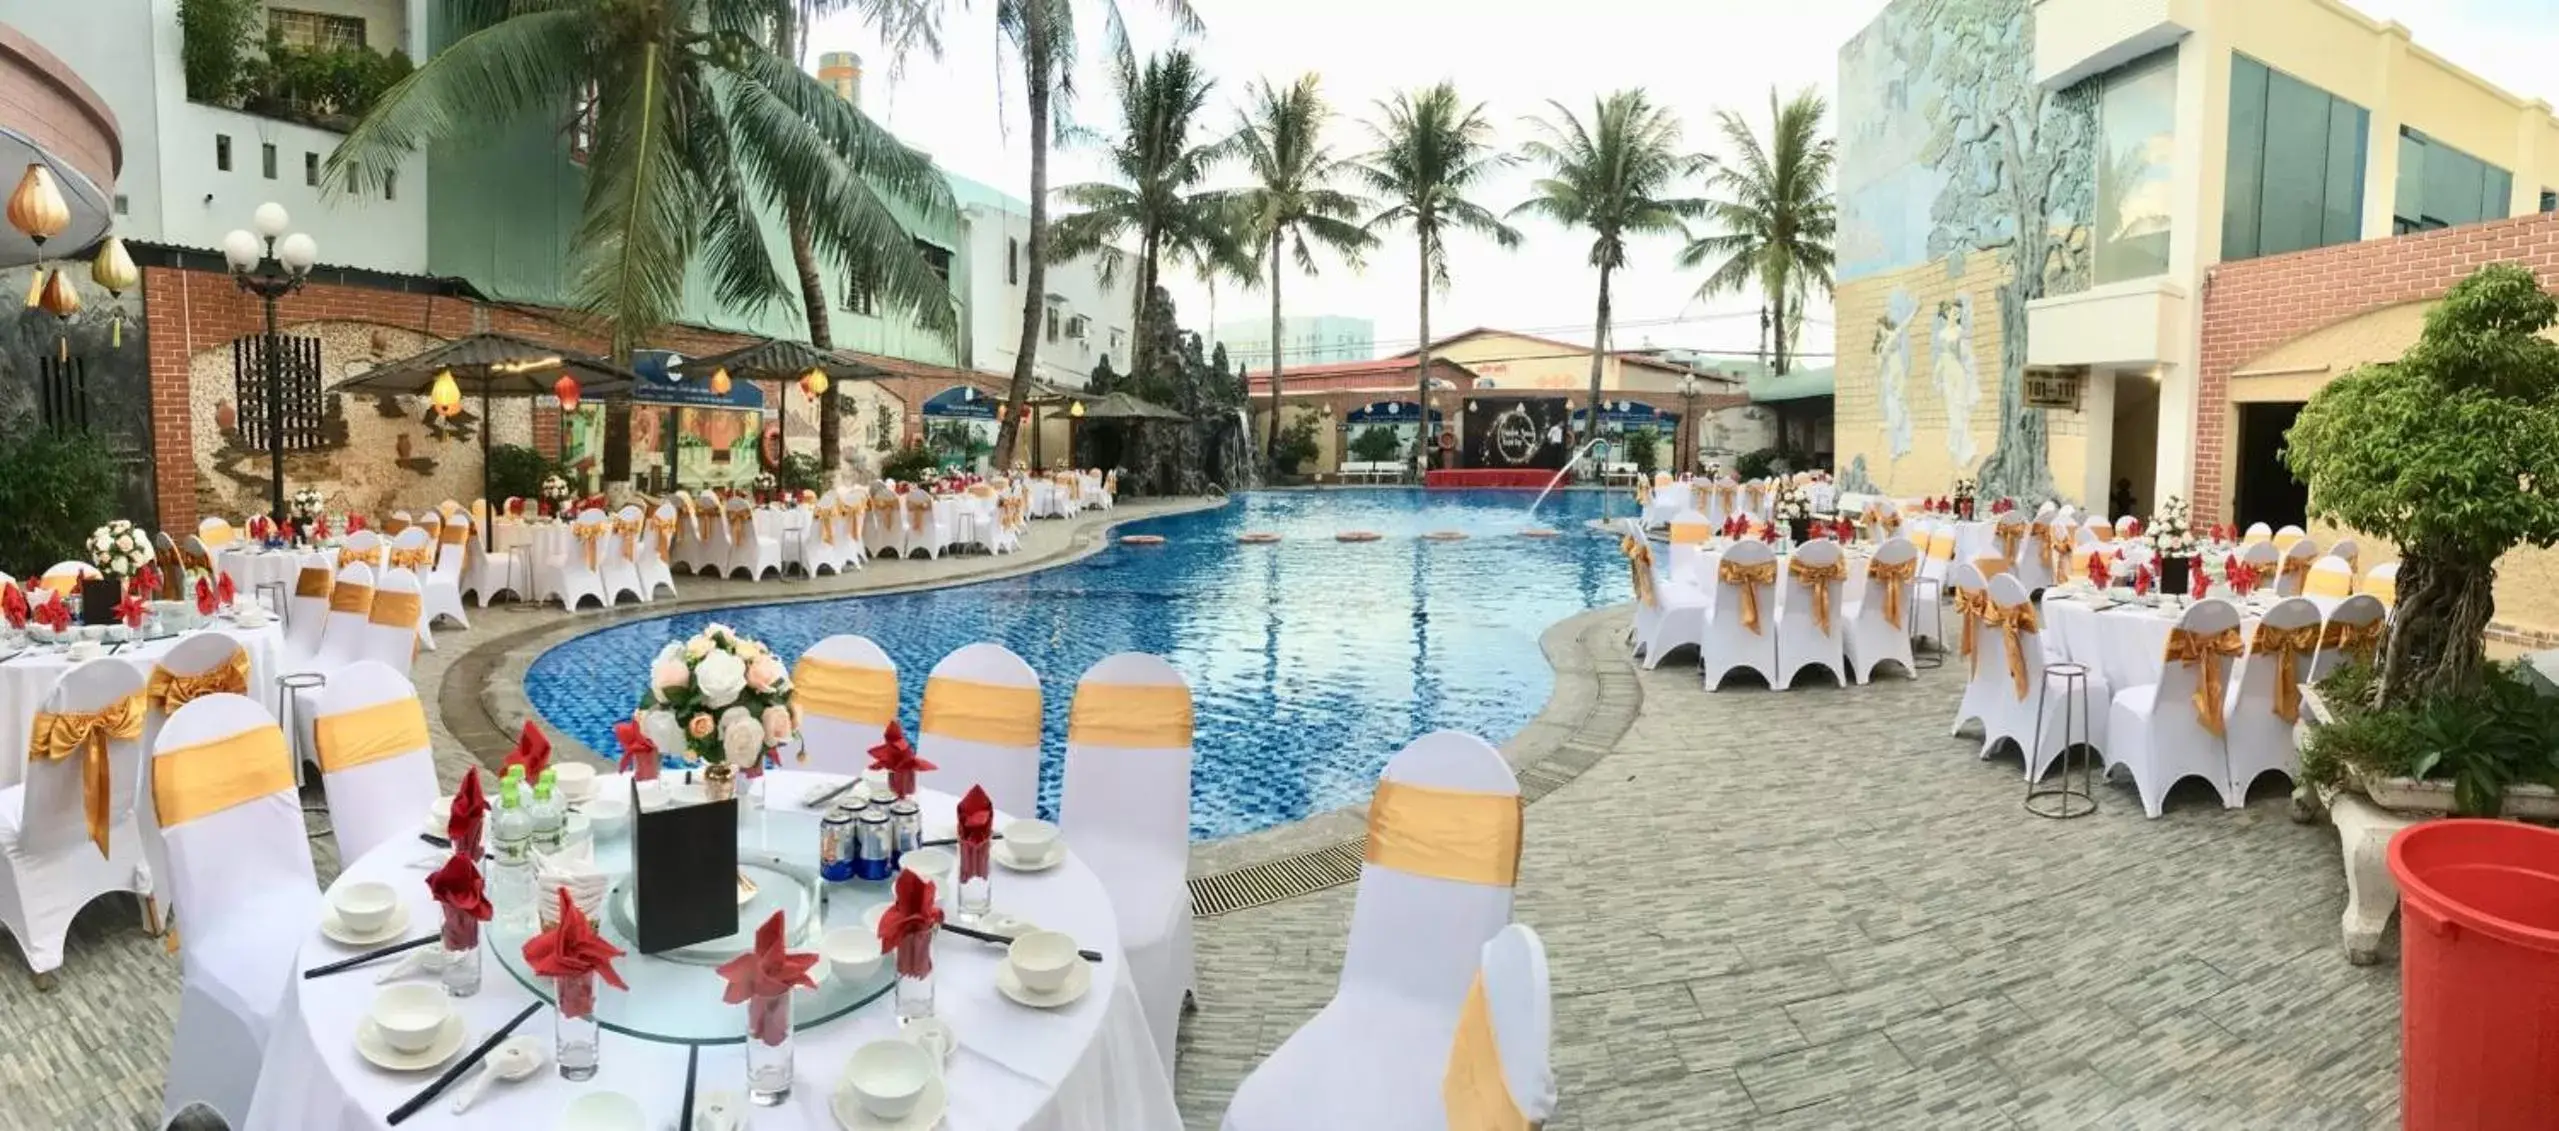 Swimming Pool in Muong Thanh Quy Nhon Hotel